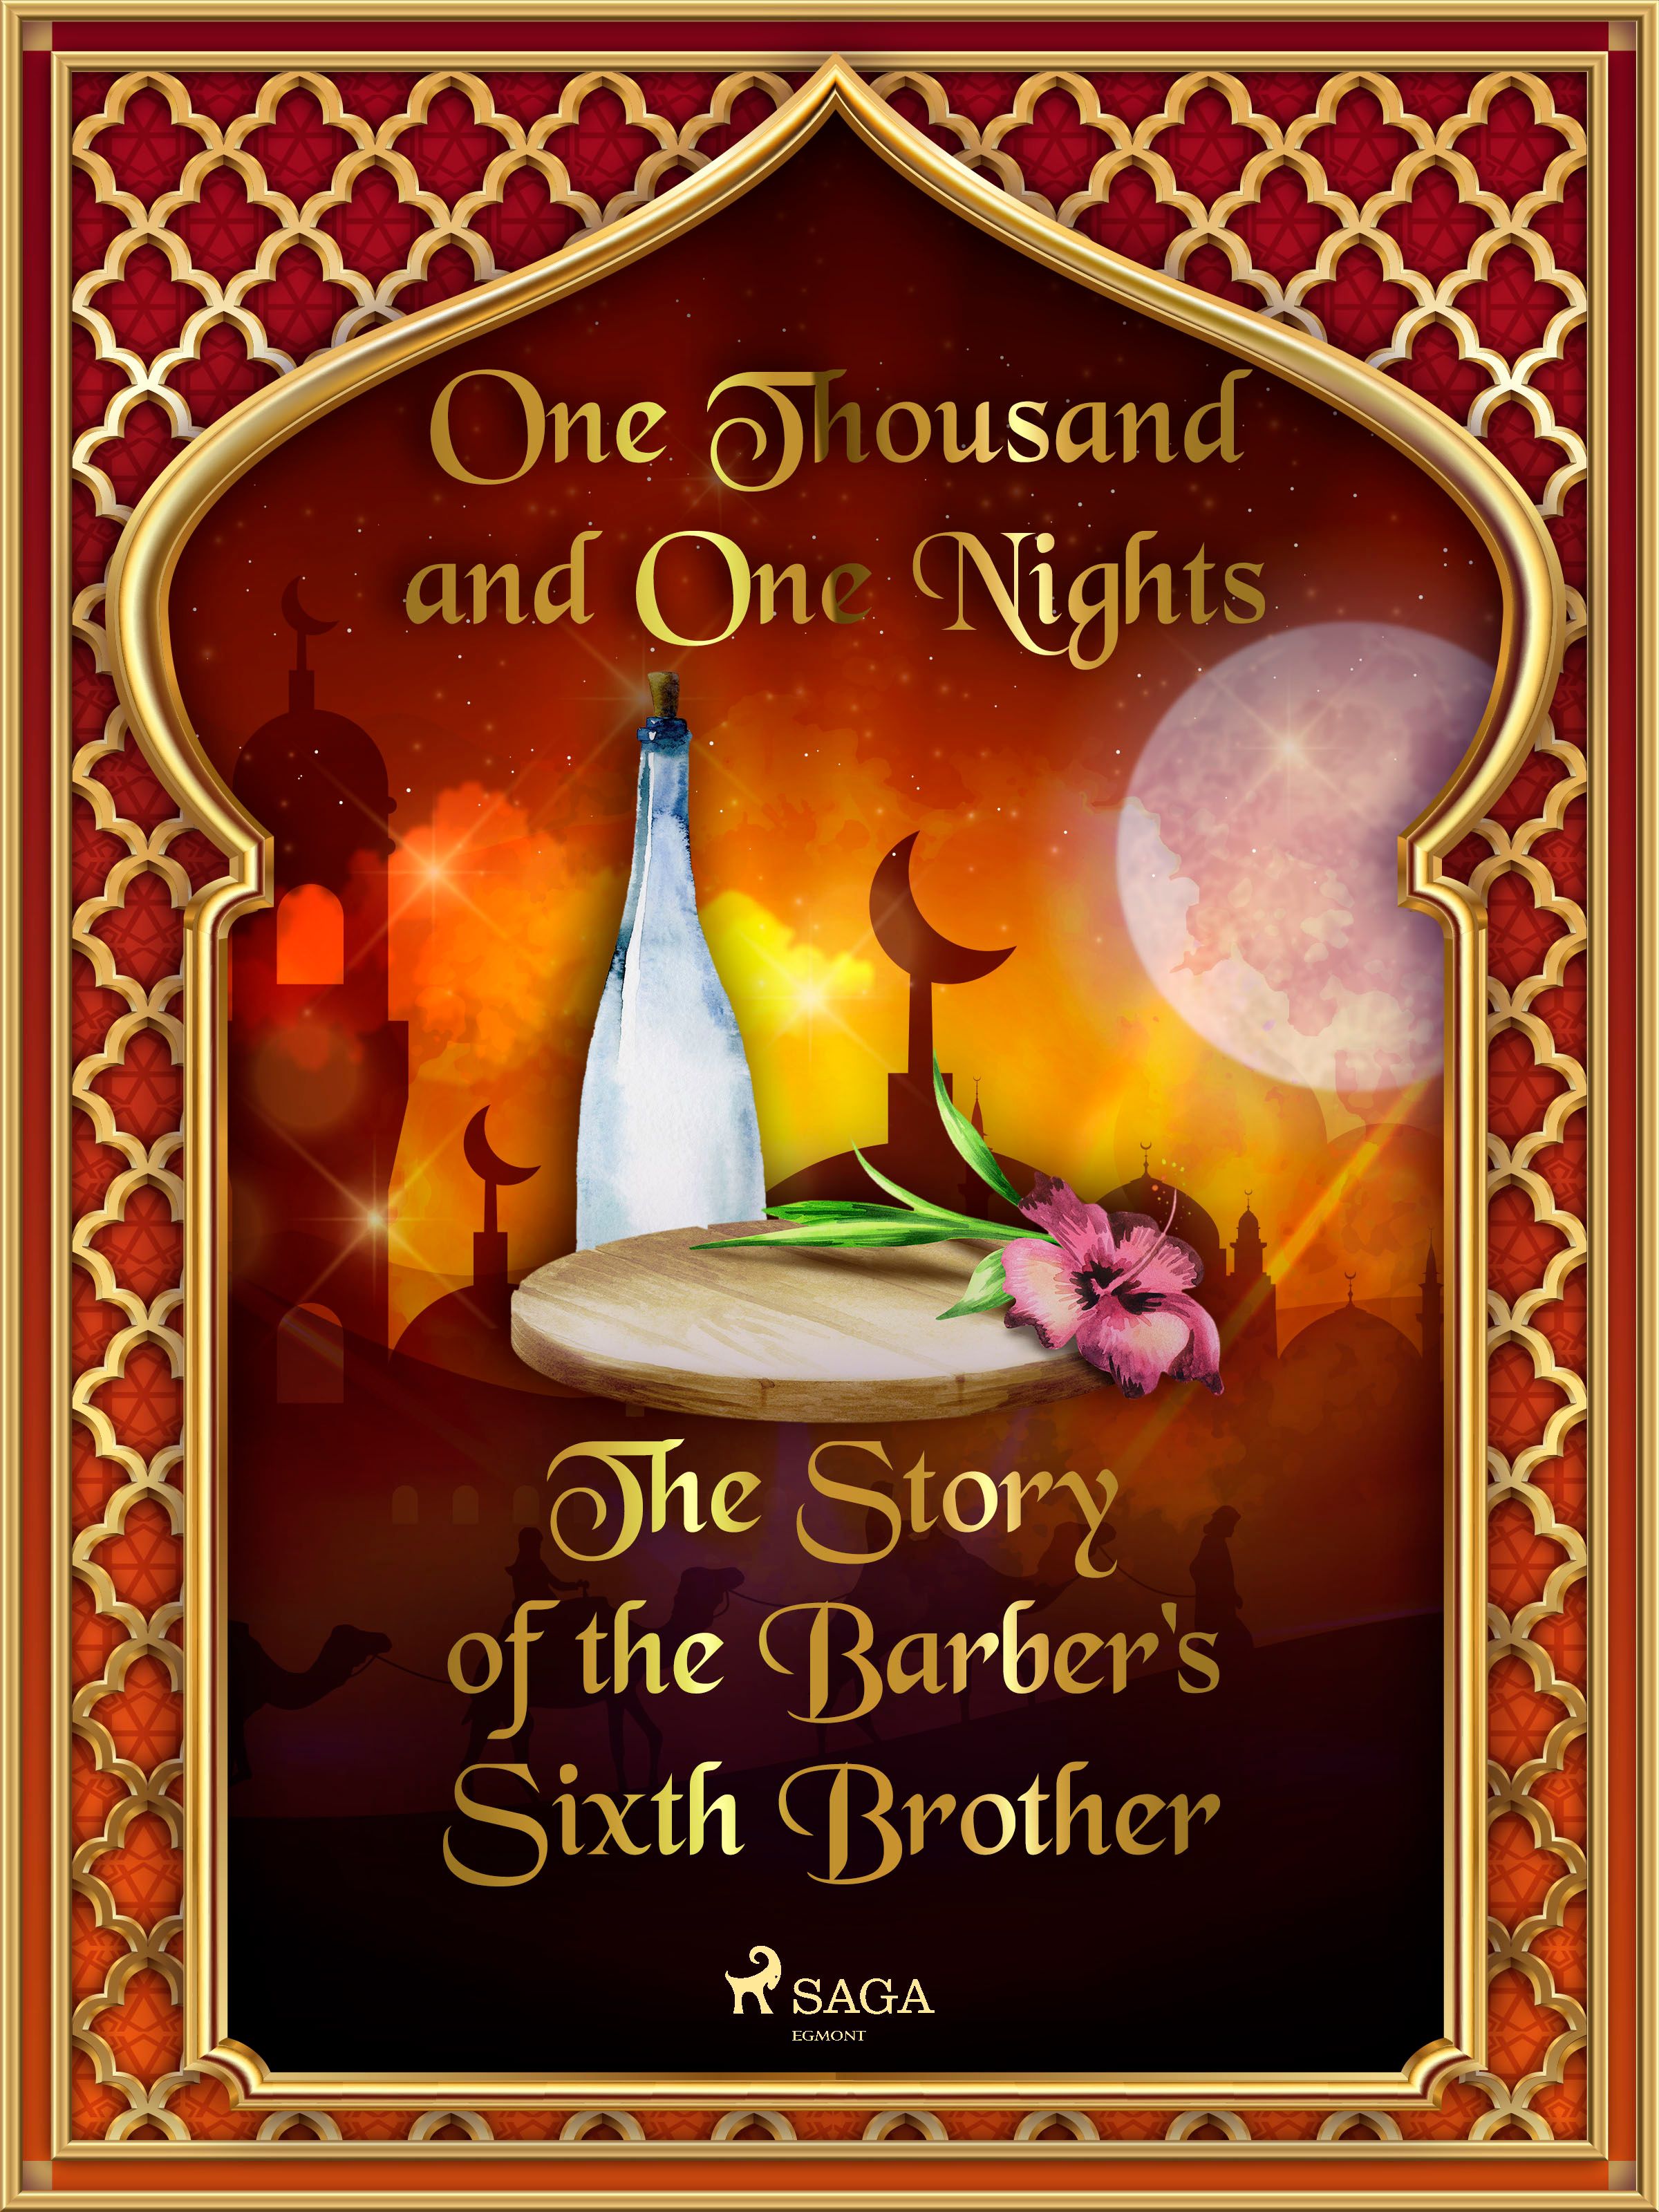 The Story of the Barber's Sixth Brother, eBook by One Thousand and One Nights